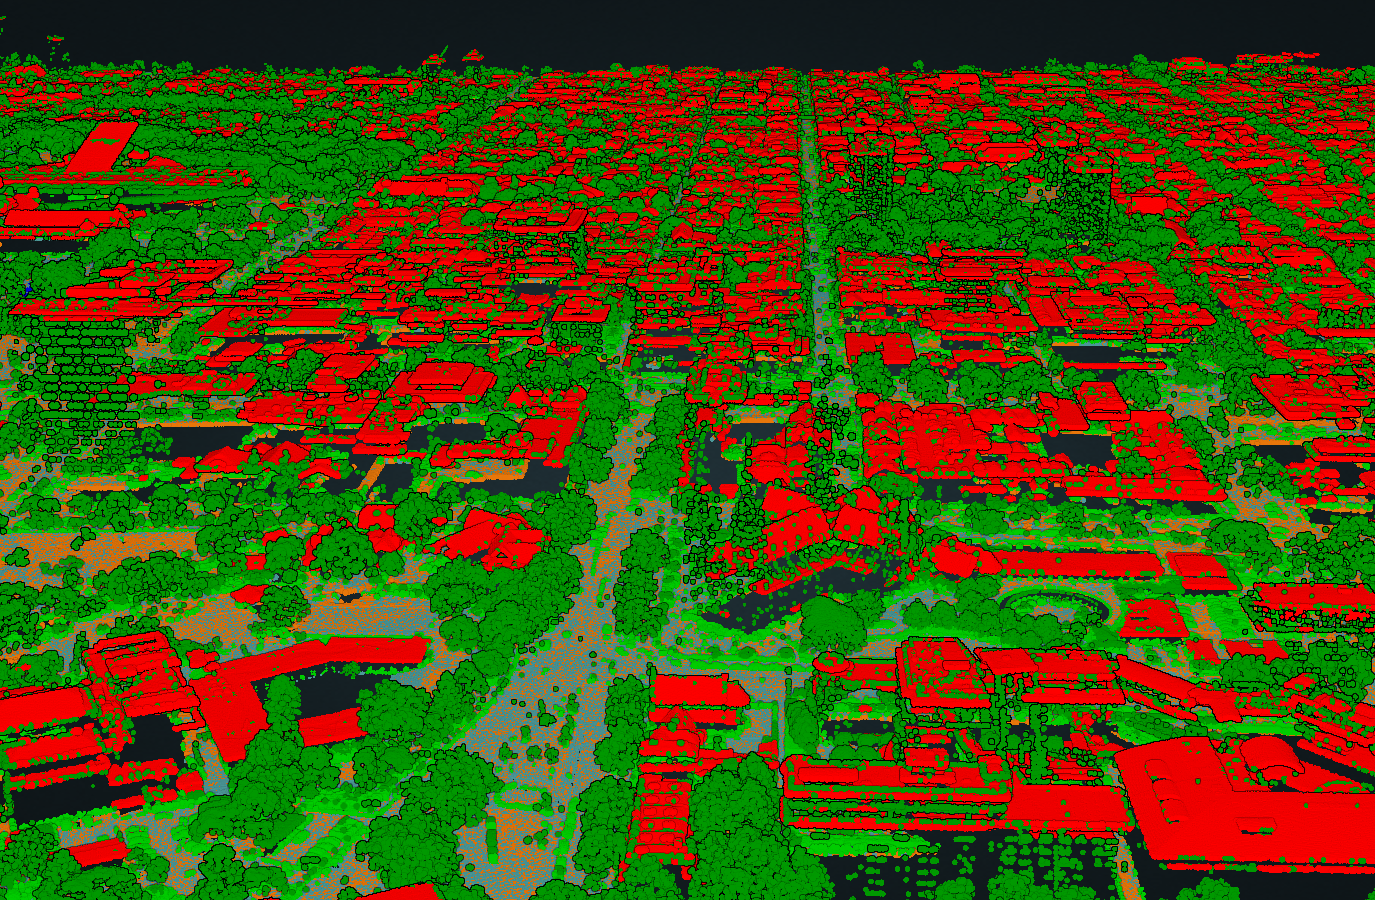 A LiDAR image over a section of Melbourne showing roads in grey, trees, grass and shrubs in green, and manmade structures in red over a suburban area..  